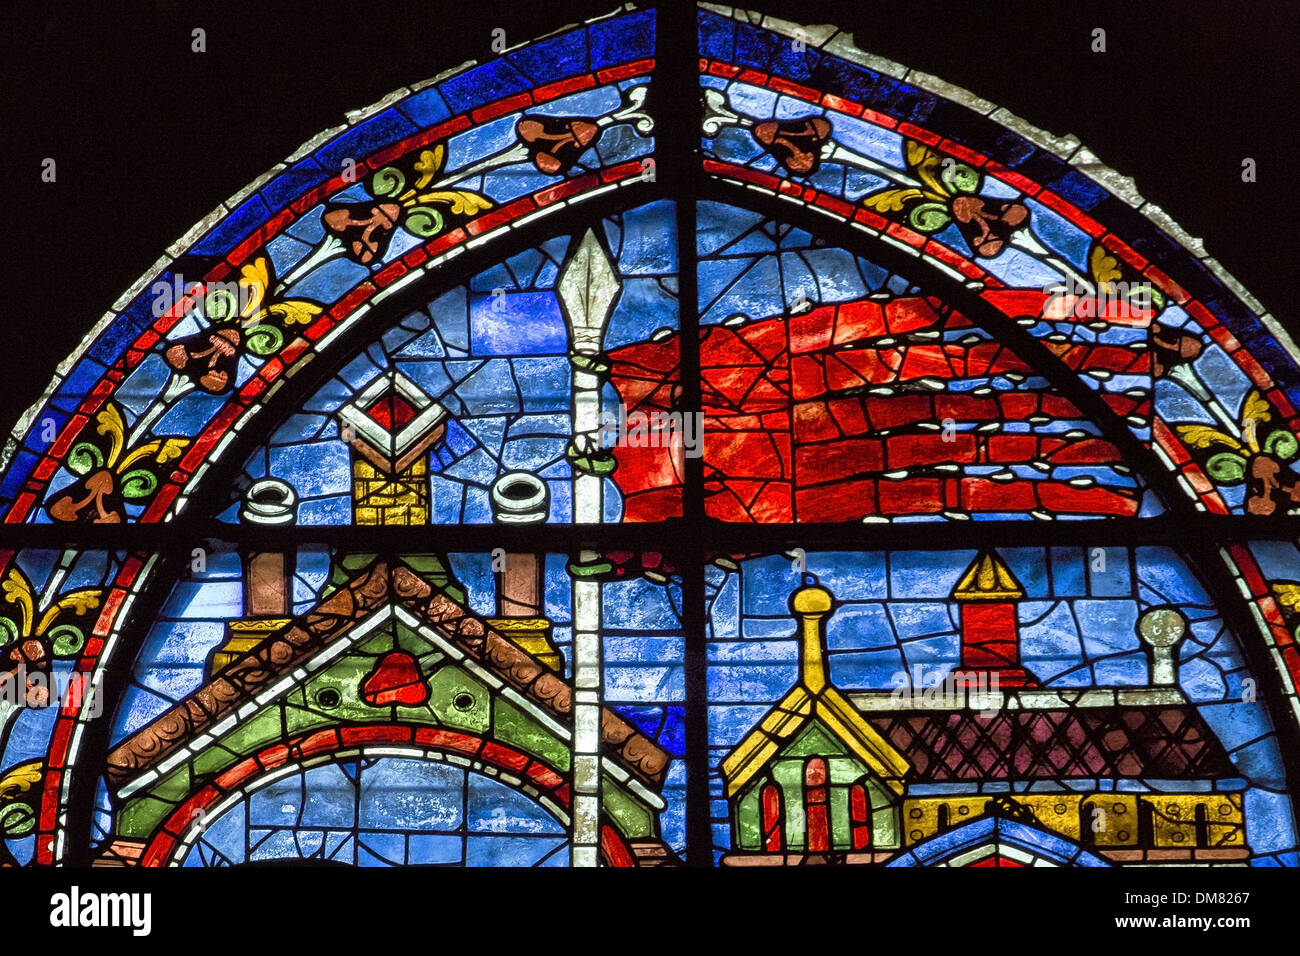 STAINED-GLASS WINDOW OF THE ORIFLAMME OF SAINT-DENIS, ONE OF THE OLDEST REPRESENTATIONS OF THE FIRST FLAG OF FRANCE USED IN TIMES OF WAR IN THE MIDDLE AGES, INTERIOR OF THE OUR LADY OF CHARTRES CATHEDRAL, LISTED AS A WORLD HERITAGE SITE BY UNESCO, EURE-ET Stock Photo